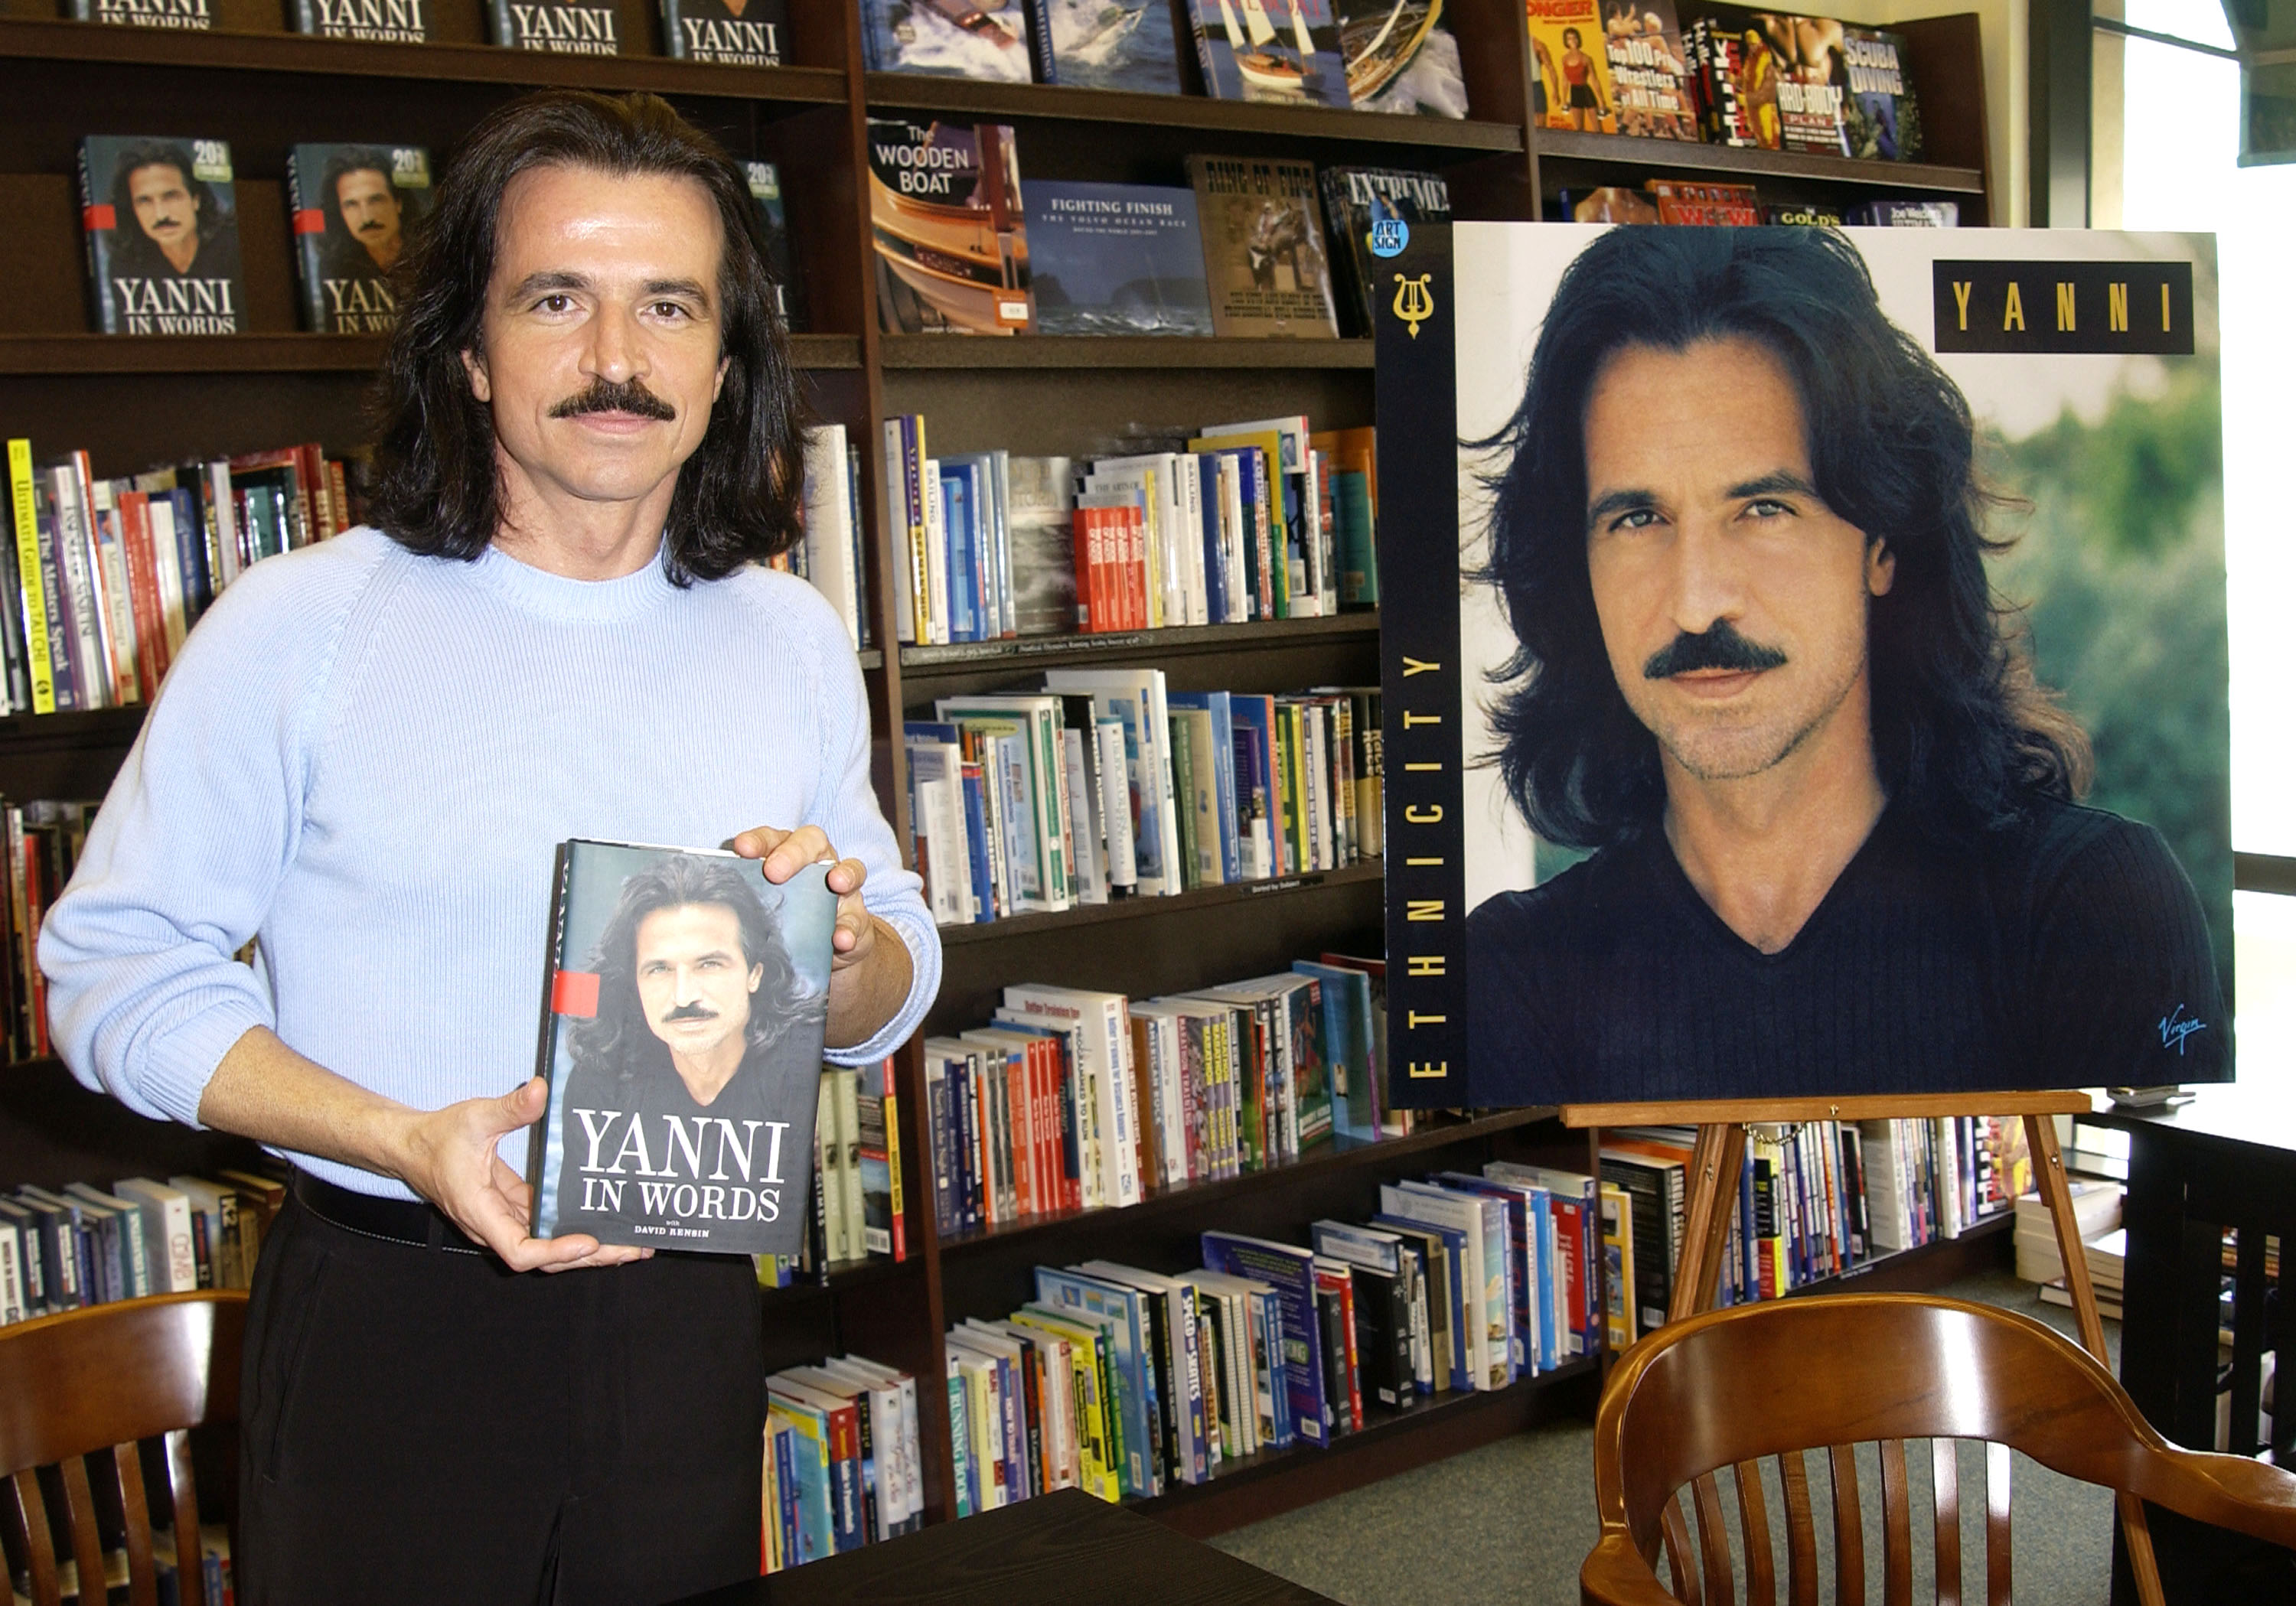 Yanni listens to yanny and laurel